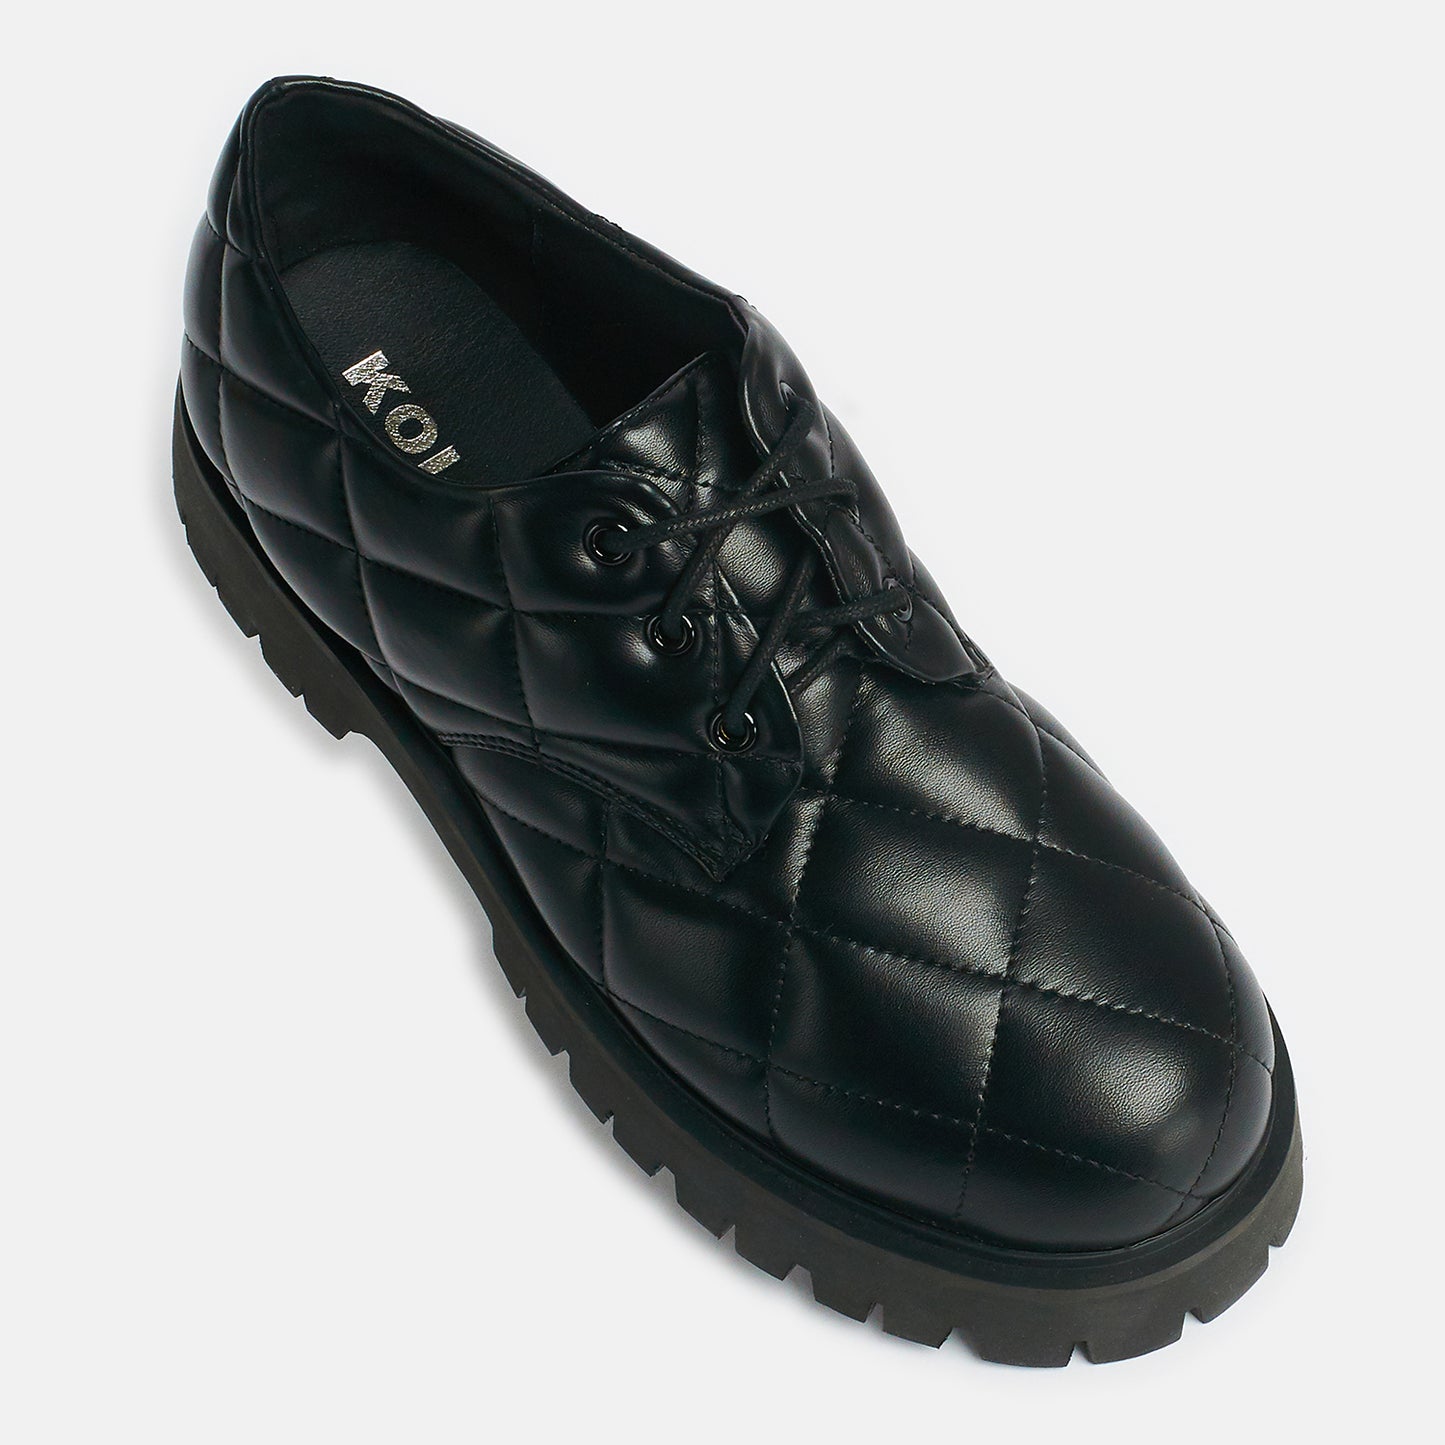 The Snug Cave Men's Black Quilted Shoes - Shoes - KOI Footwear - Black - Top View